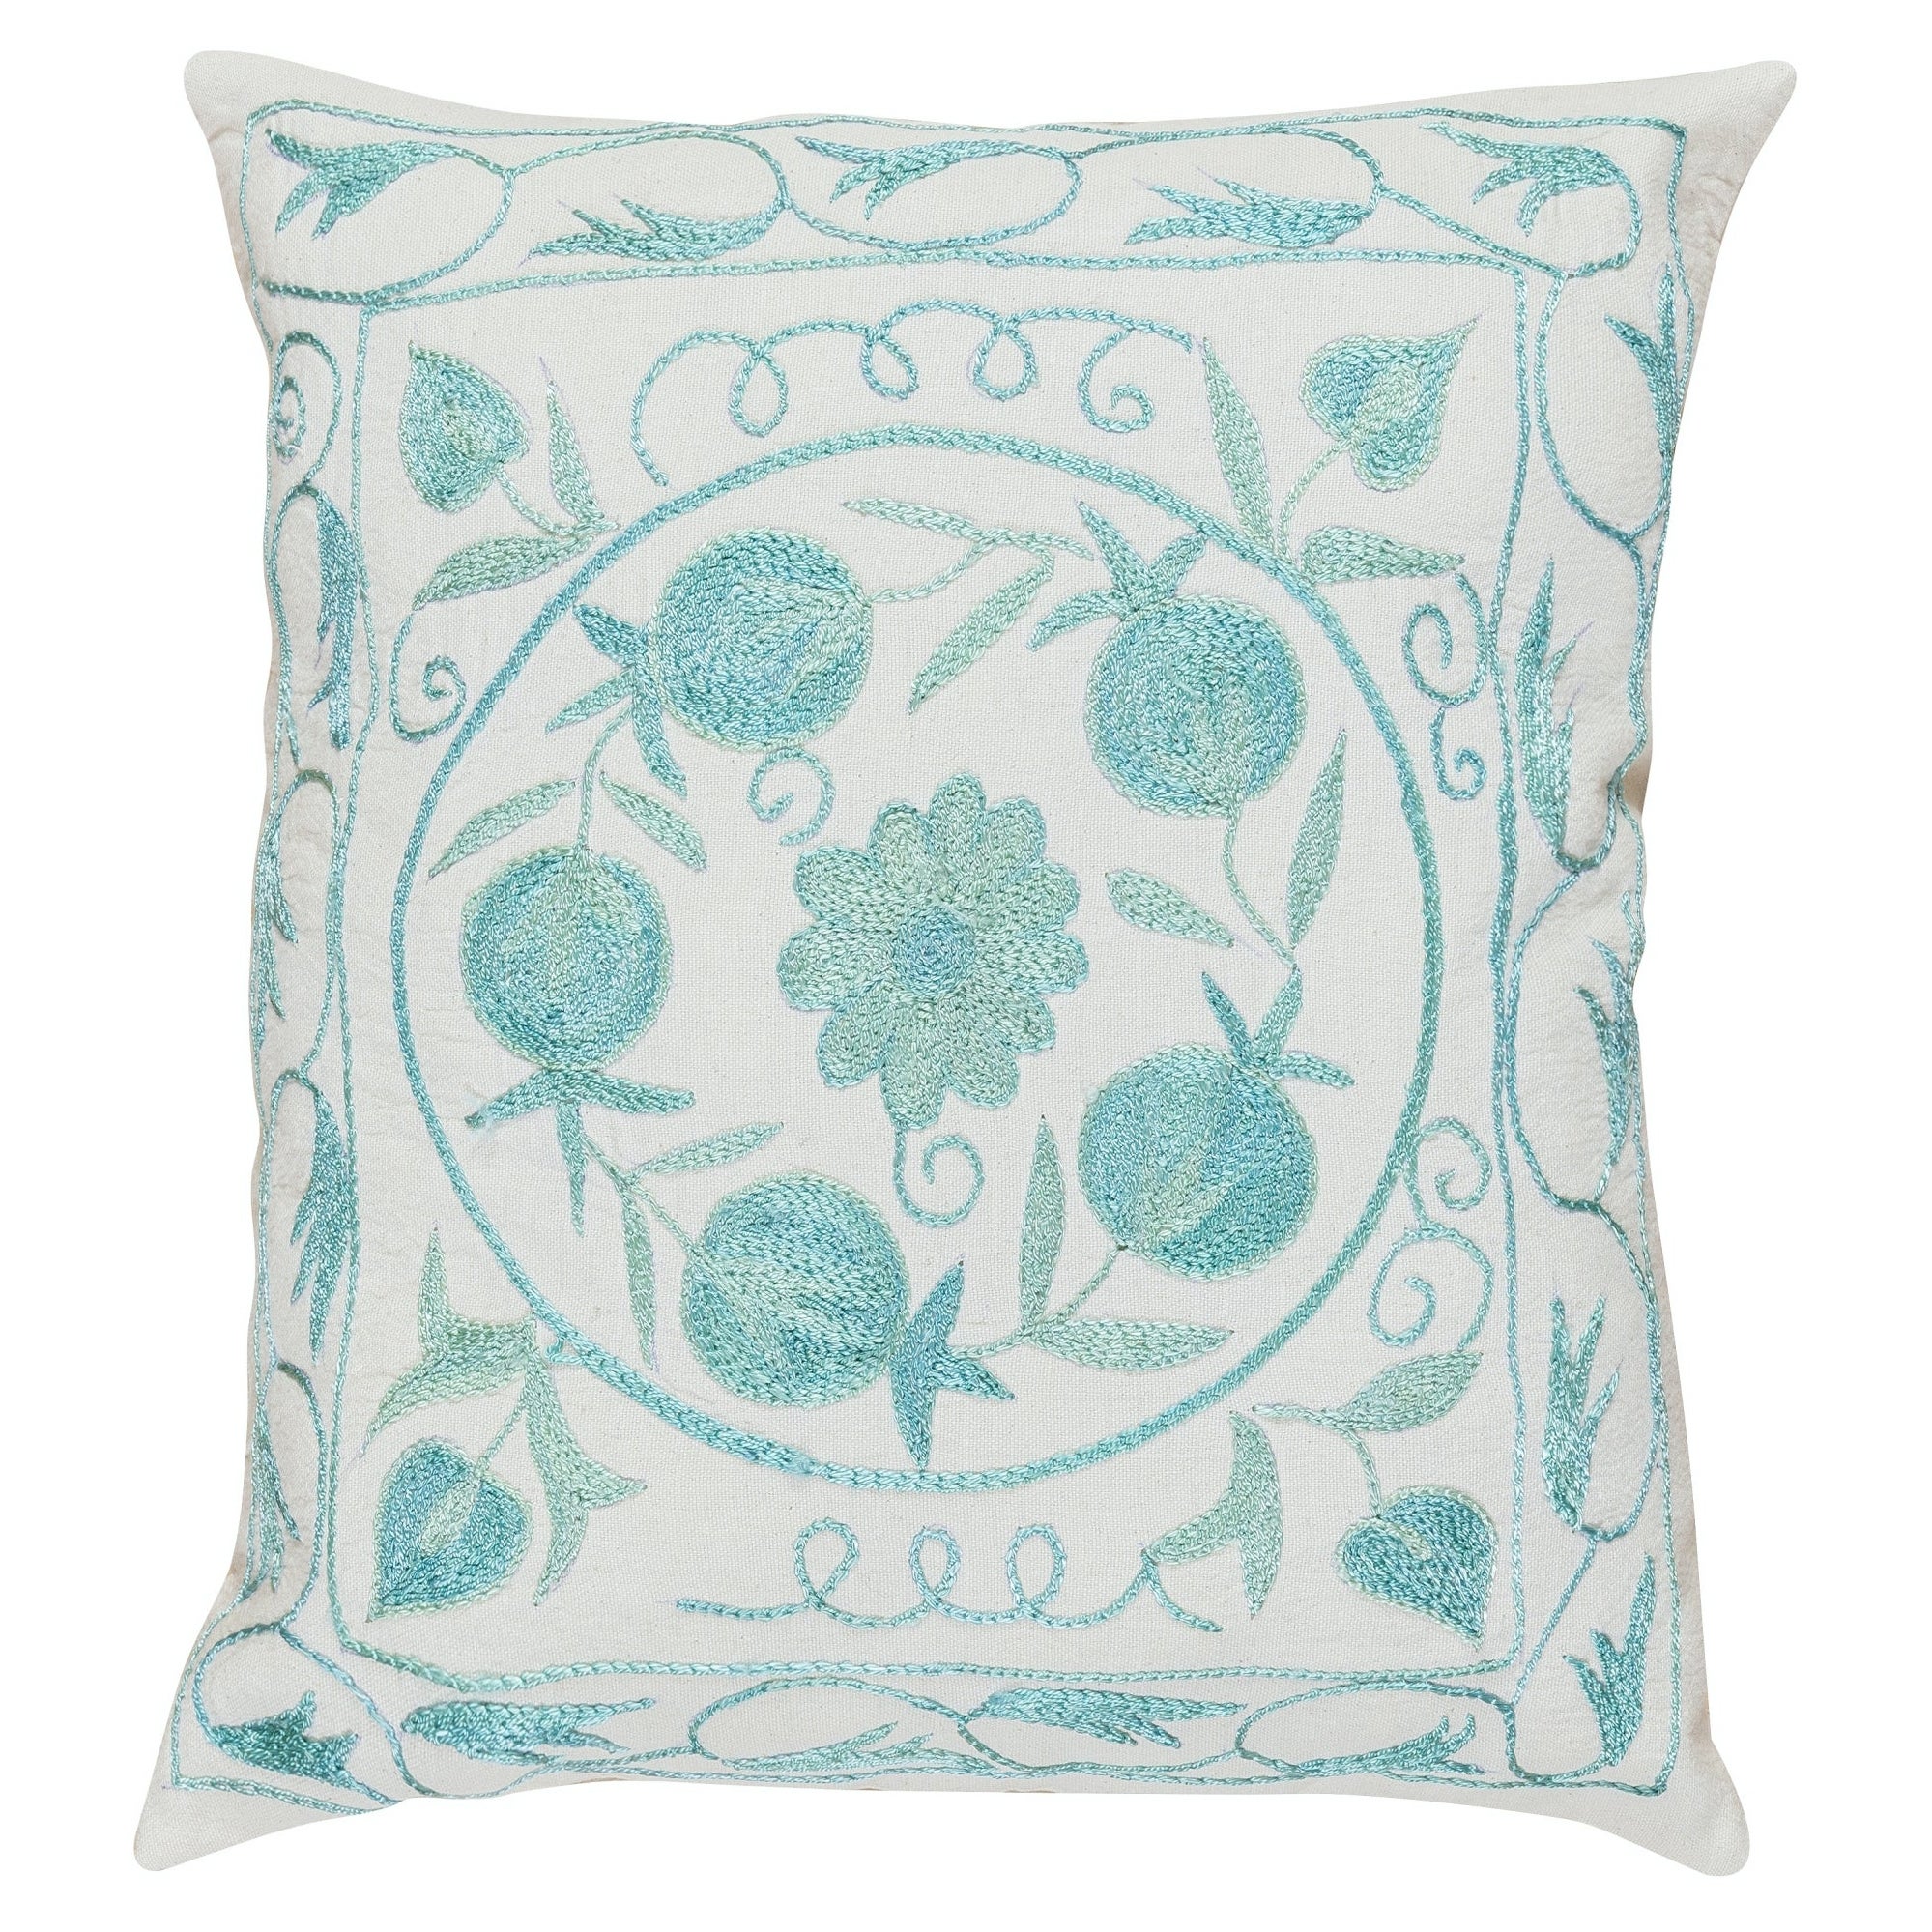 Silk Suzani Hand Embroidery Cushion Cover in Light Teal Blue & Cream. 16"x18" For Sale